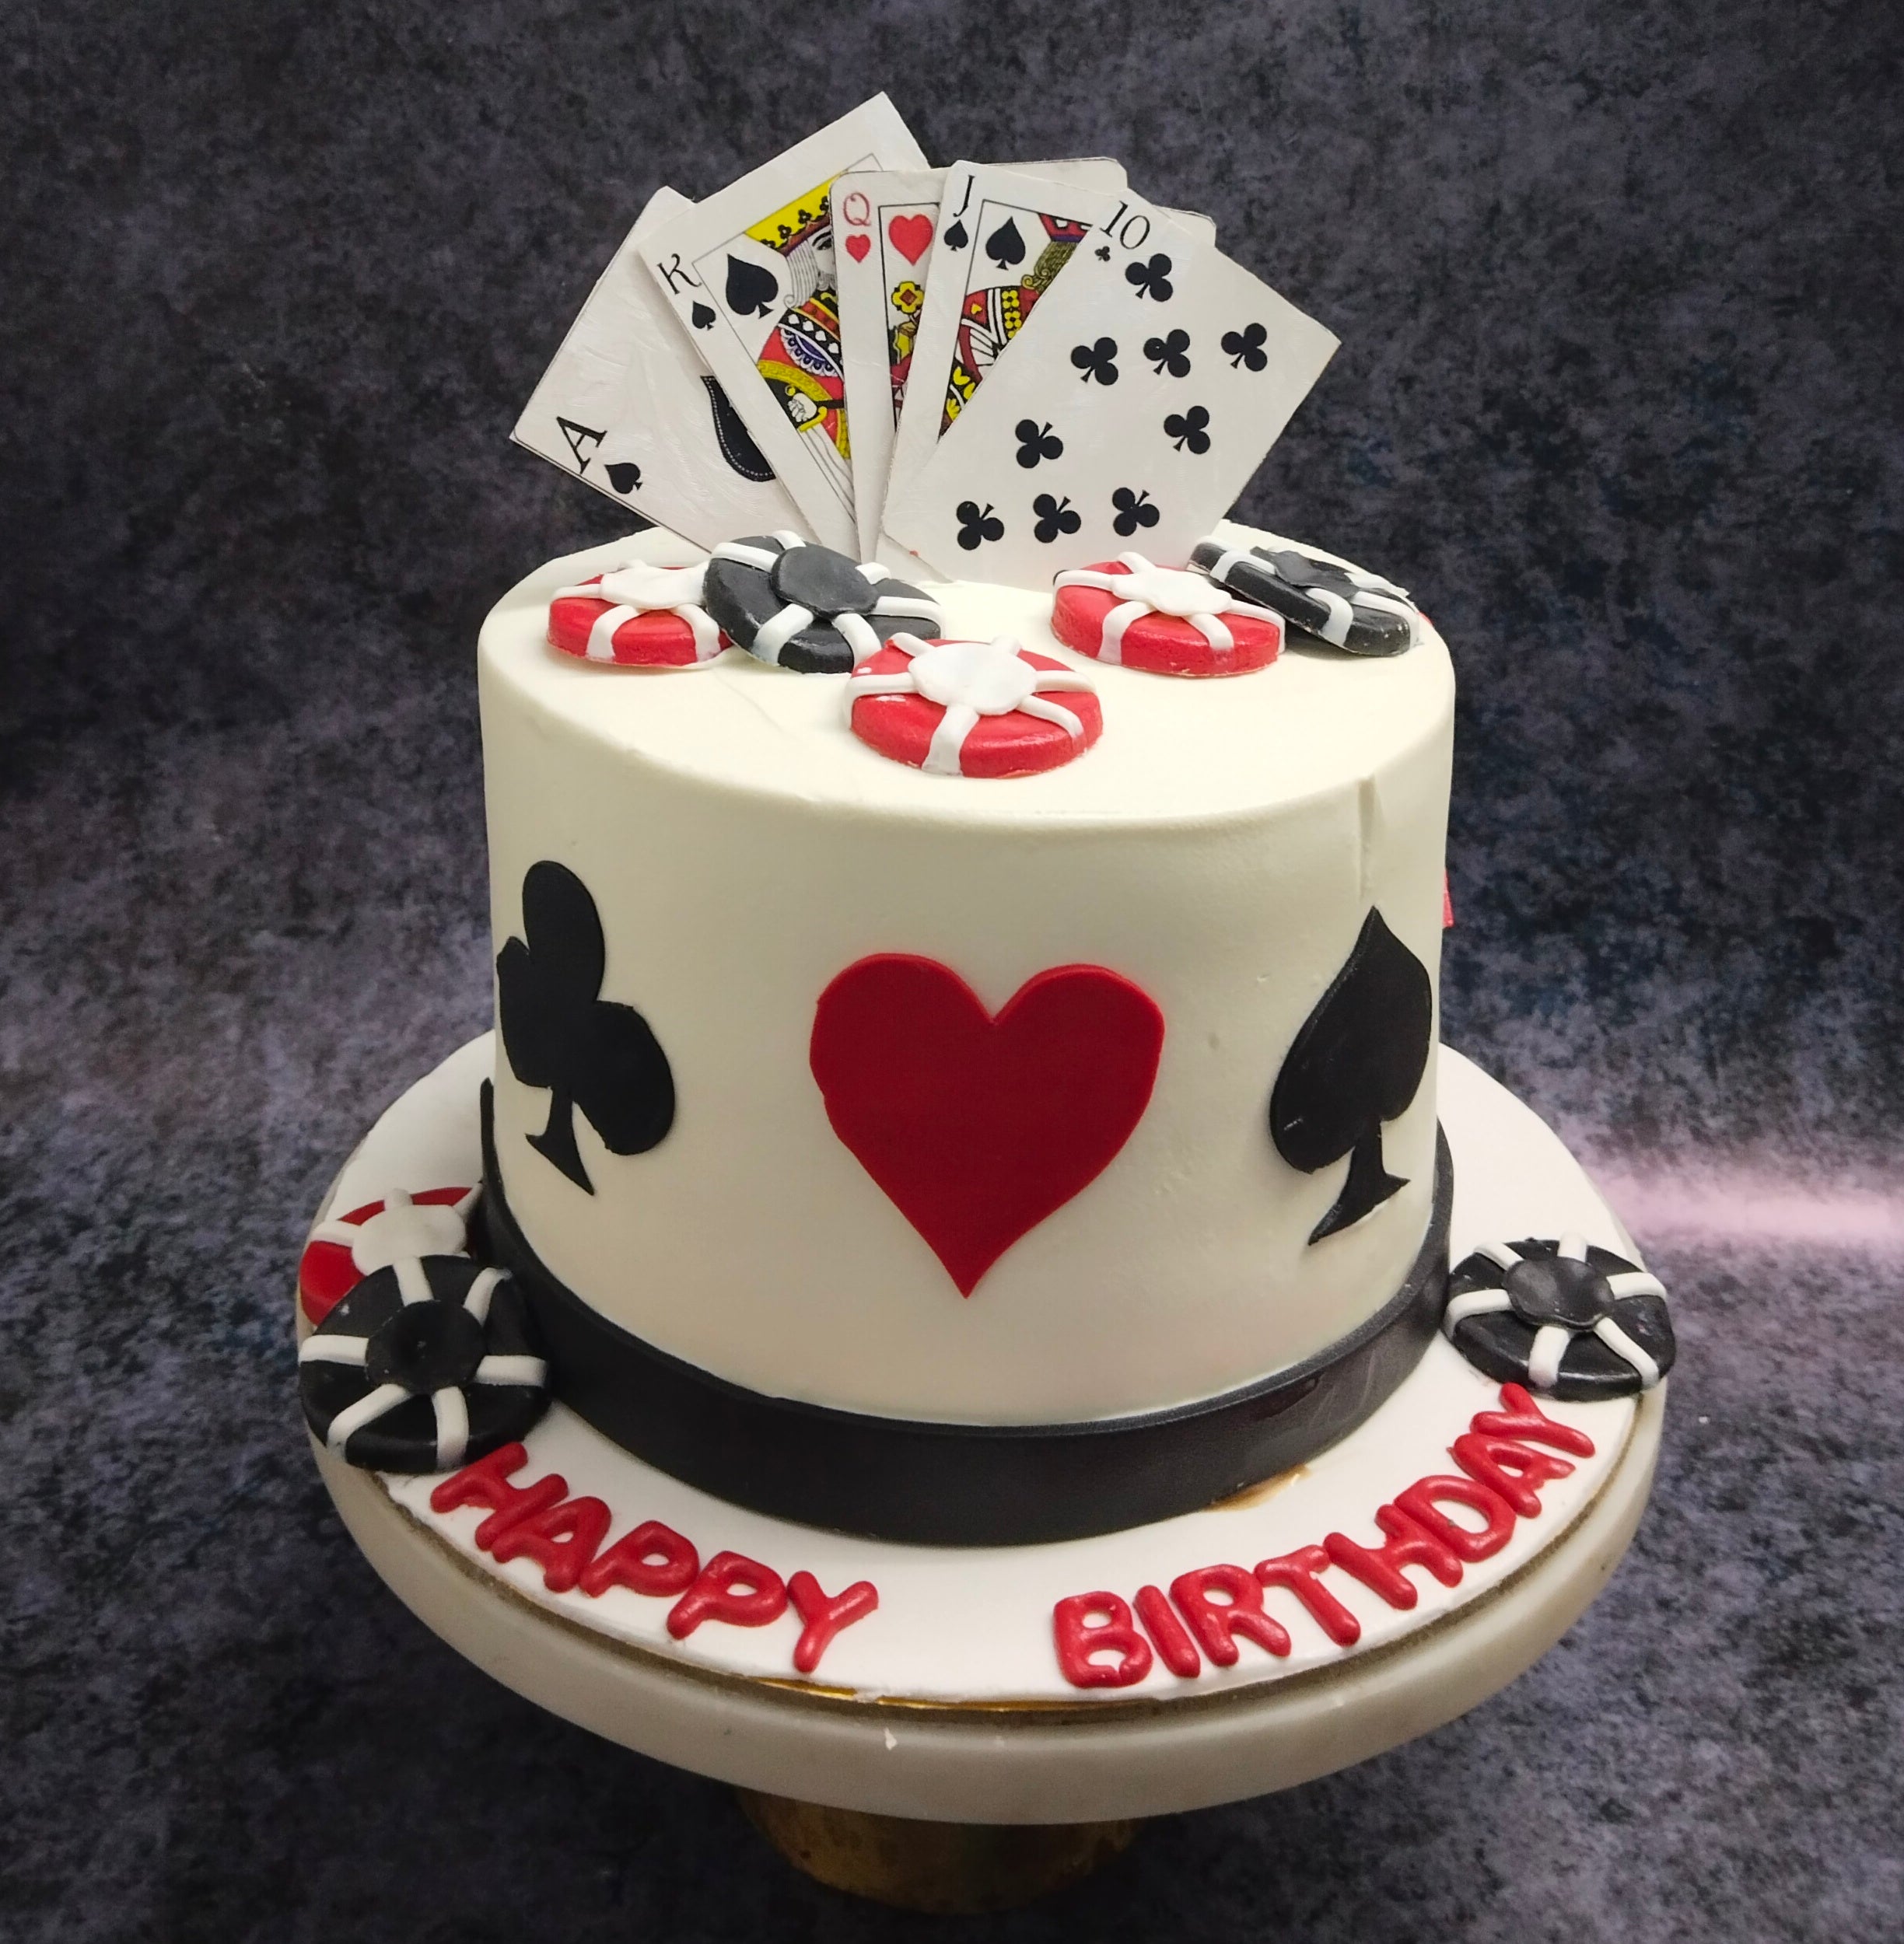 Casino Cake Kit – Over The Top Cake Supplies - The Woodlands